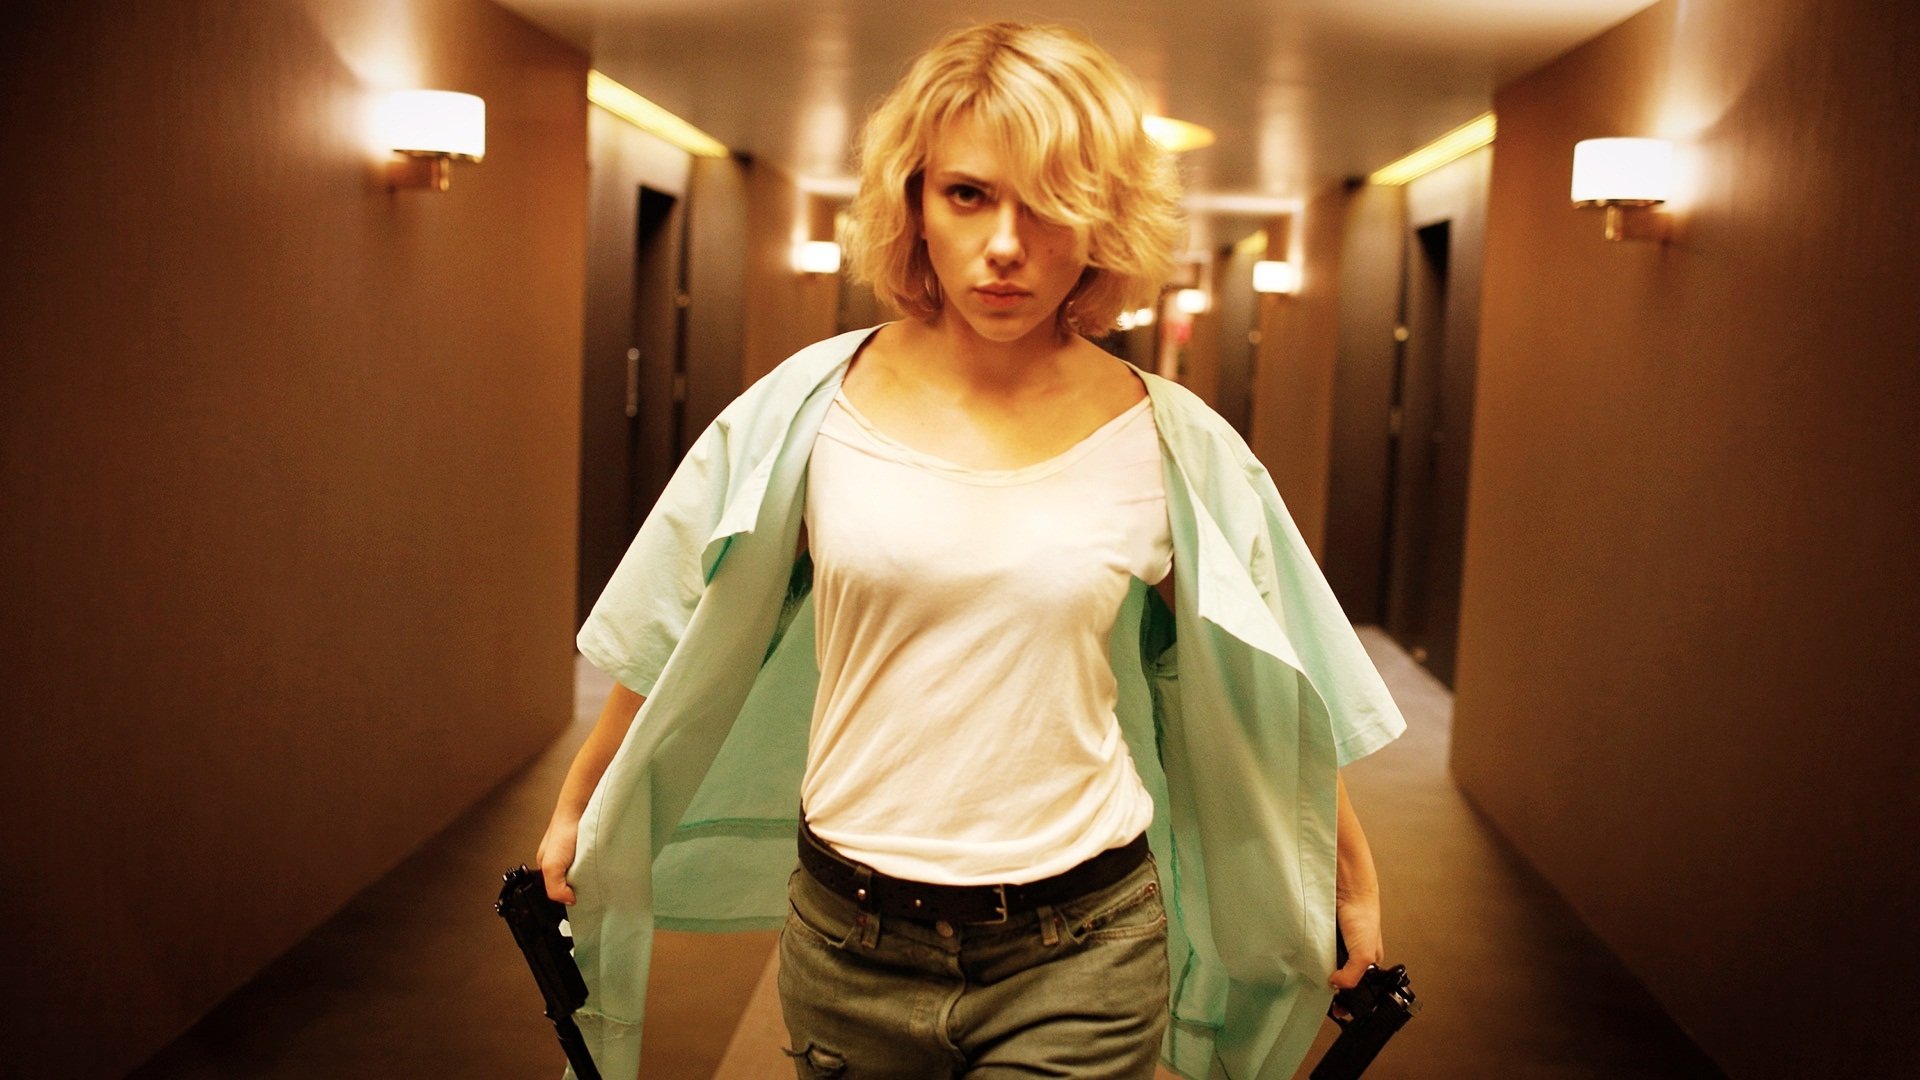 lucy scarlett johansson latest movie images, pictures, photos, hd